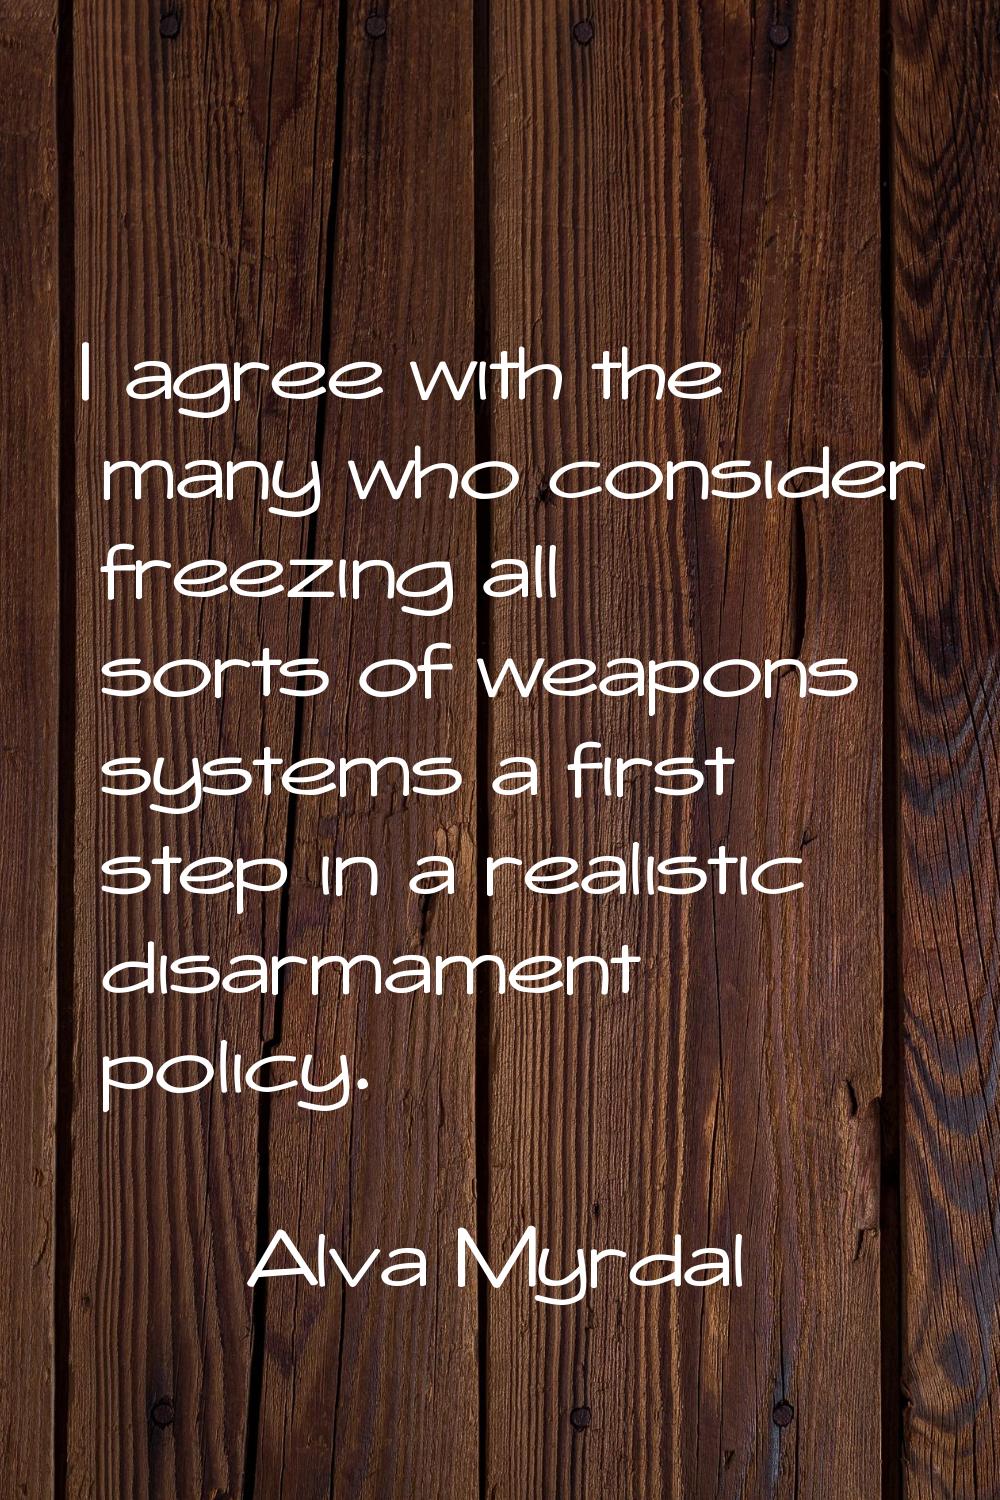 I agree with the many who consider freezing all sorts of weapons systems a first step in a realisti